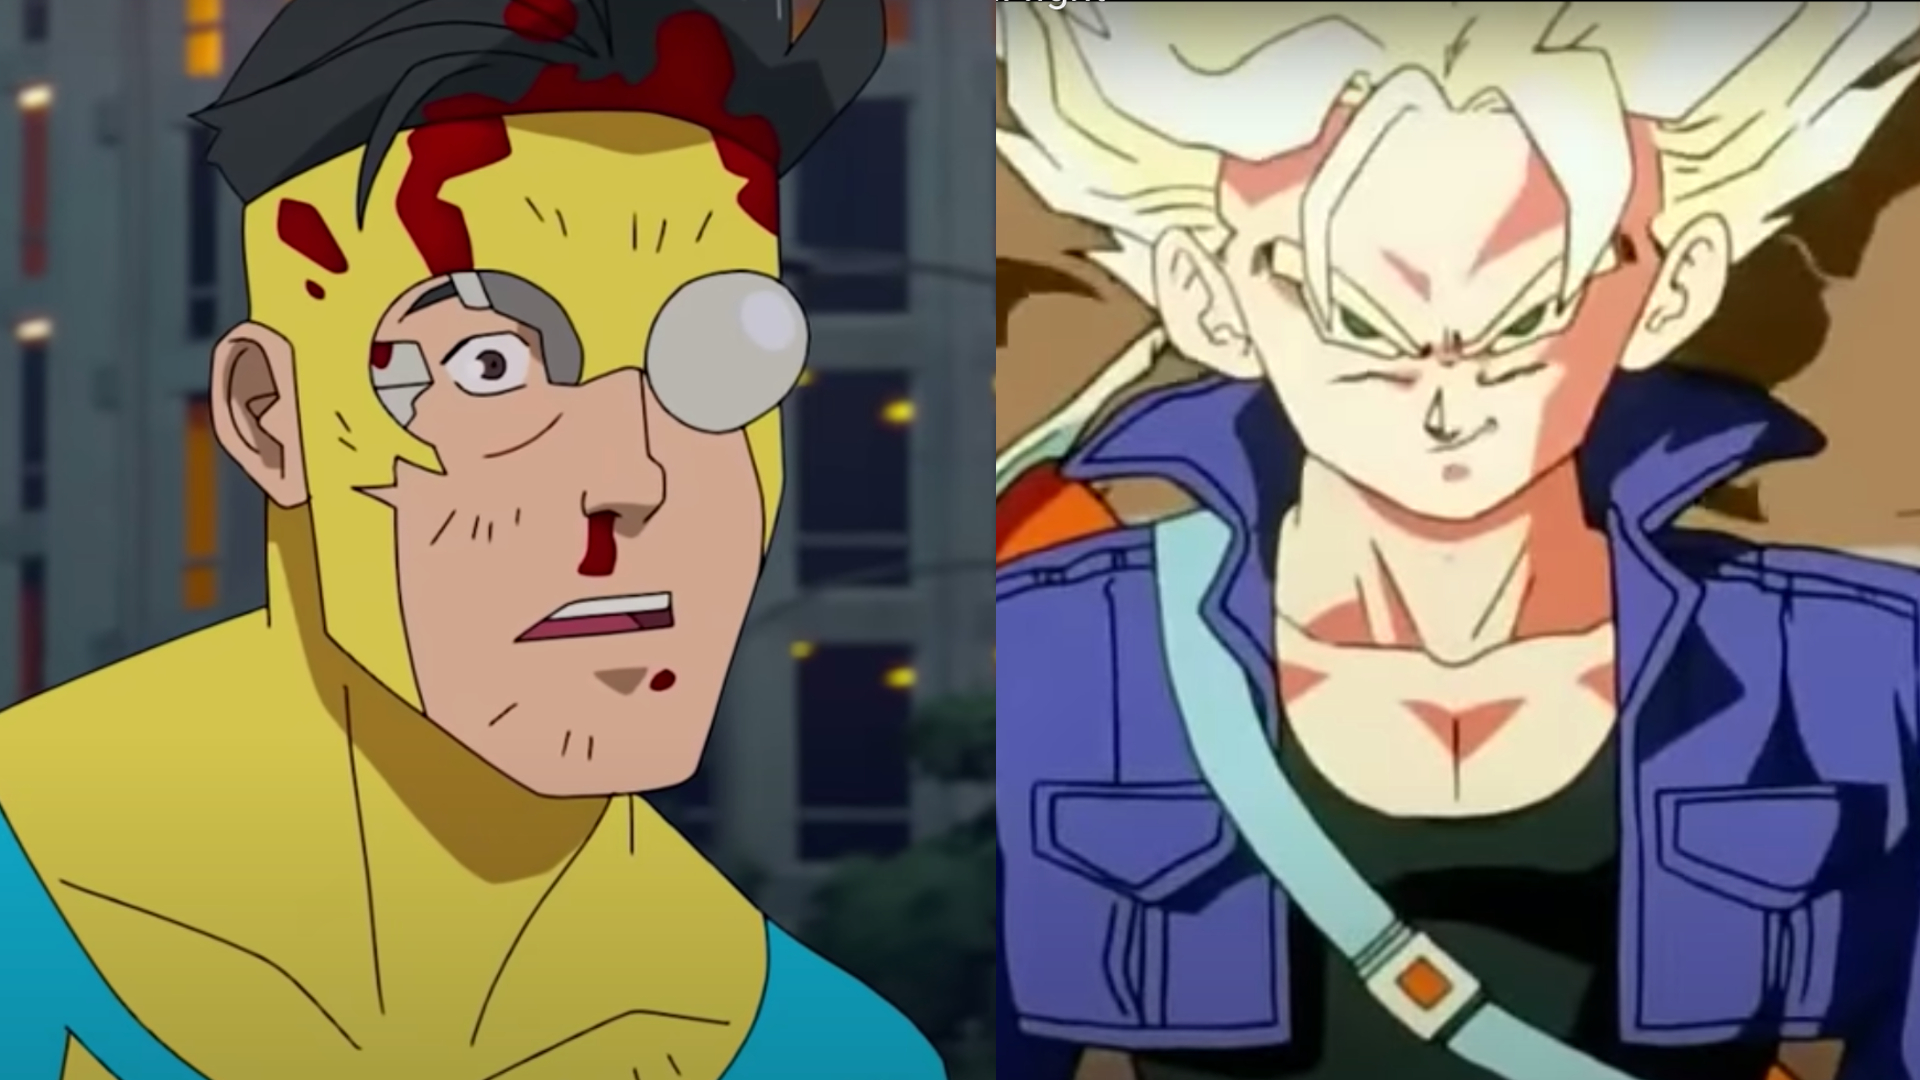 Mark and Trunks